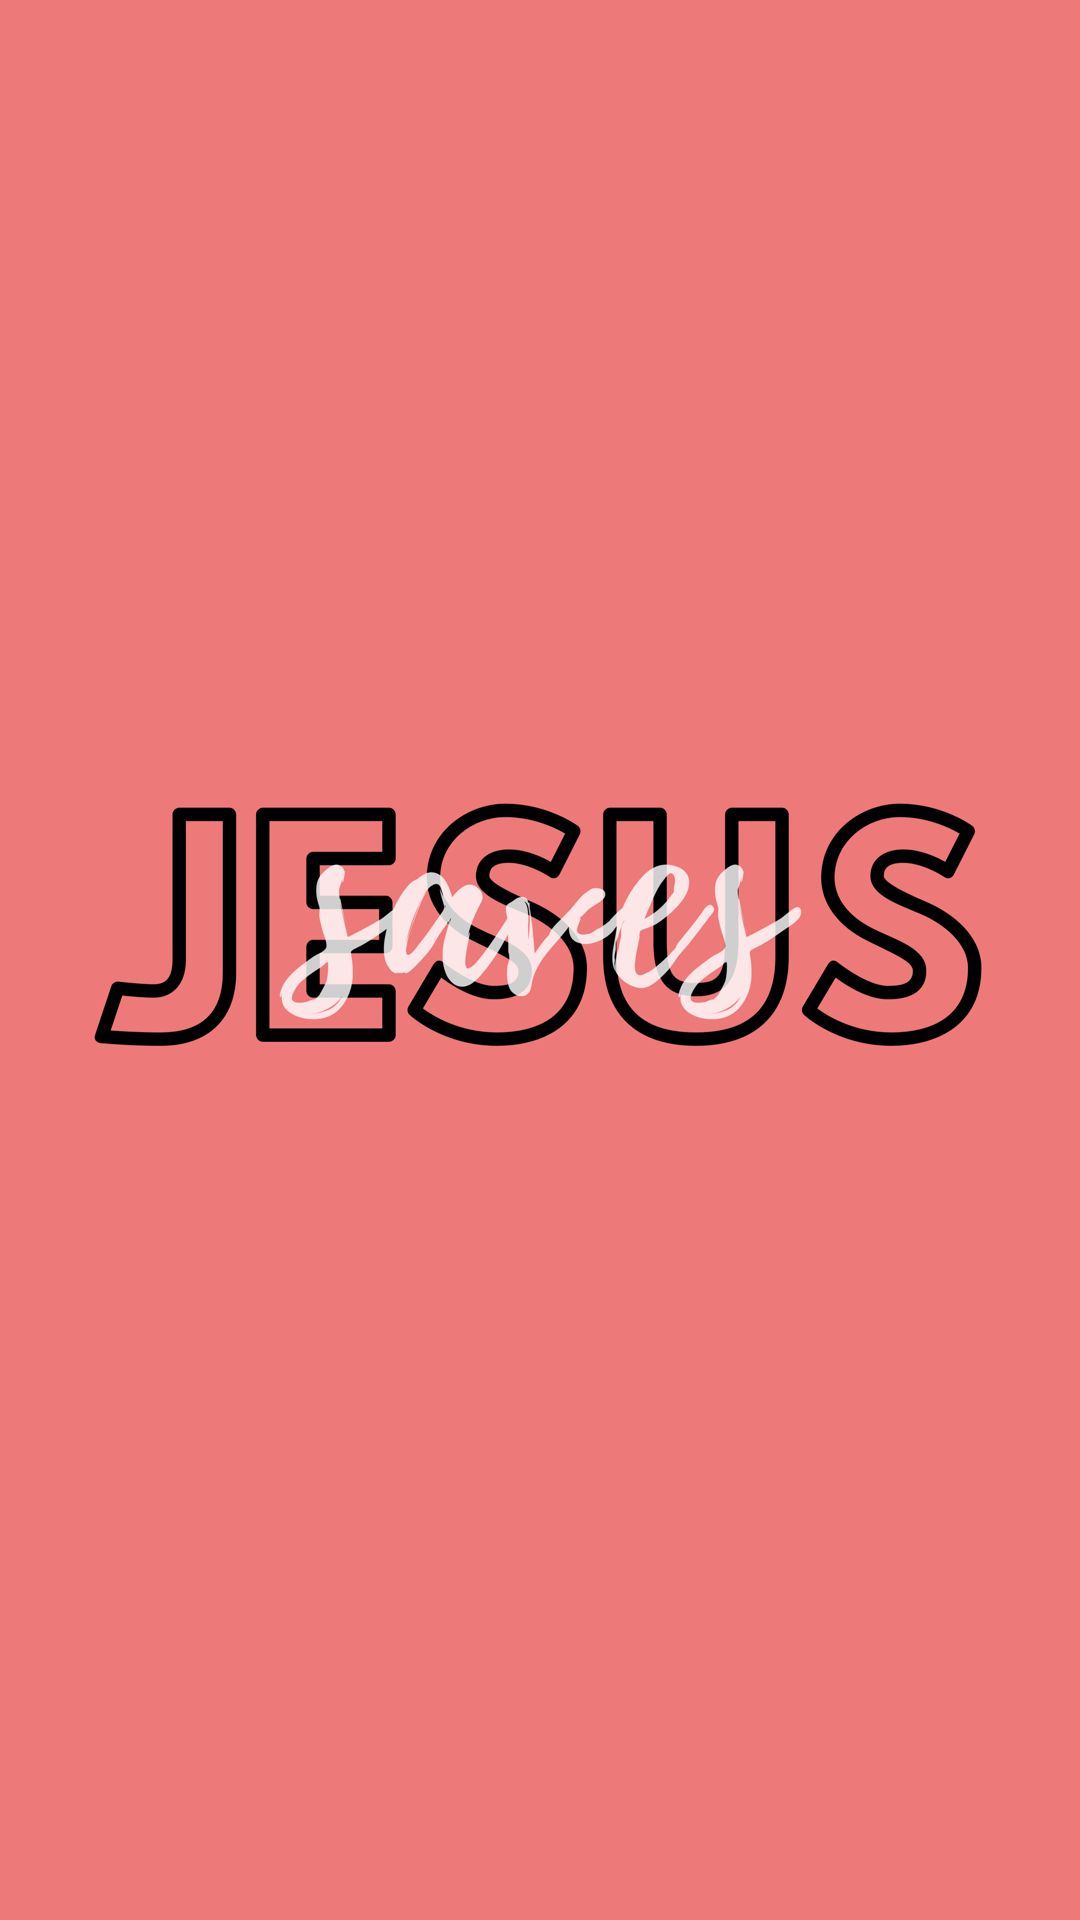 The person logo on a pink background - Jesus